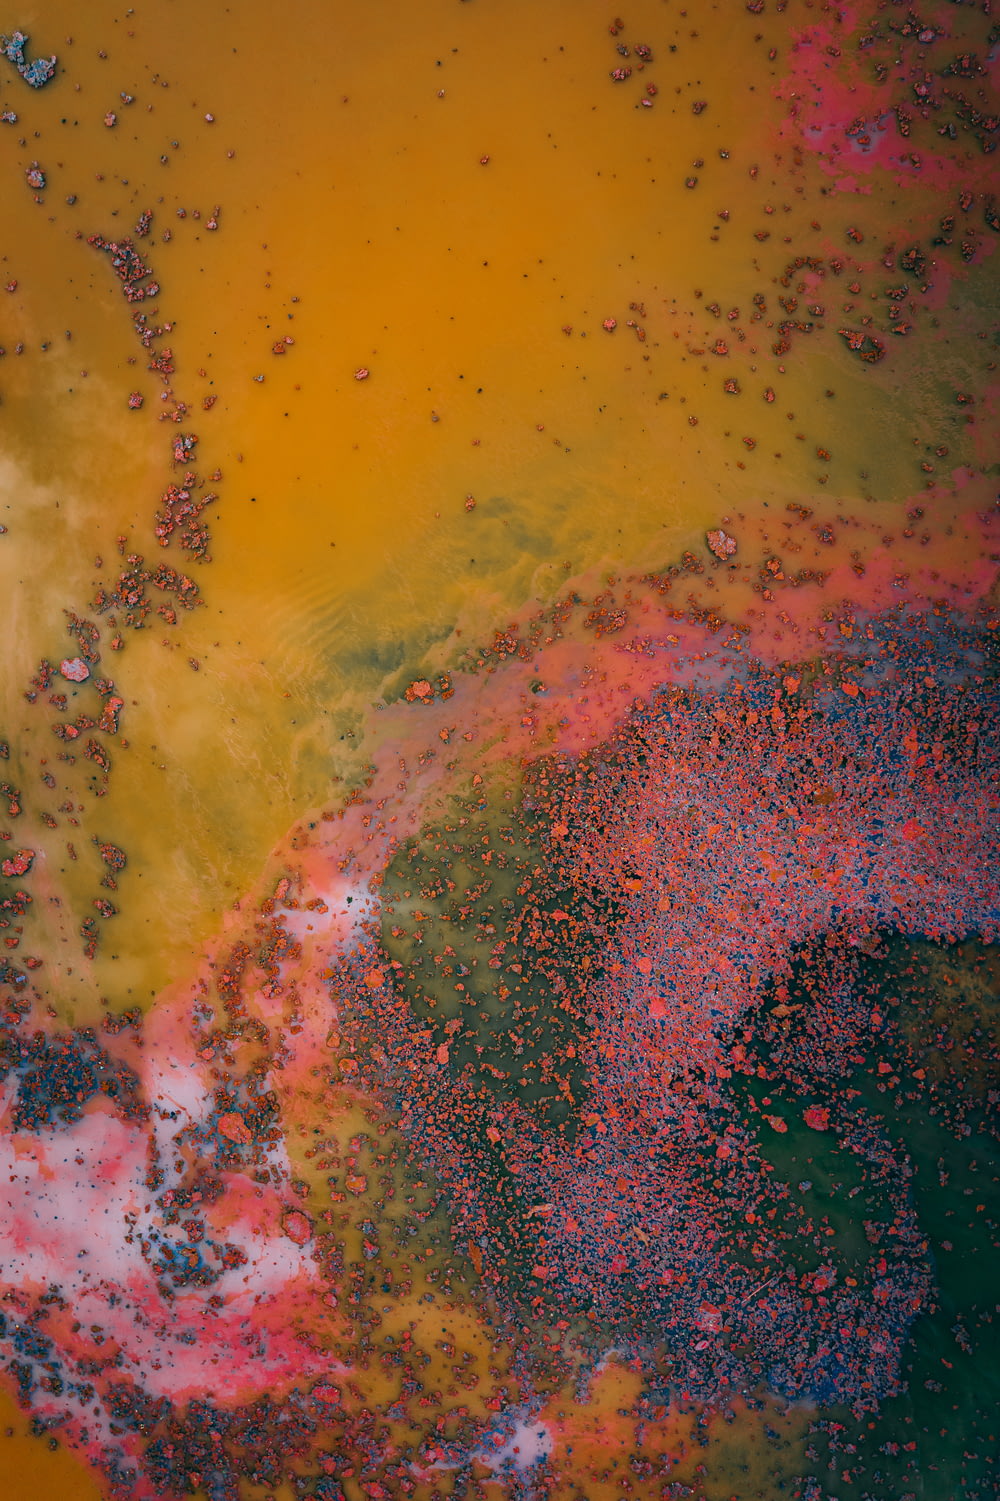 a close up of a yellow and pink substance